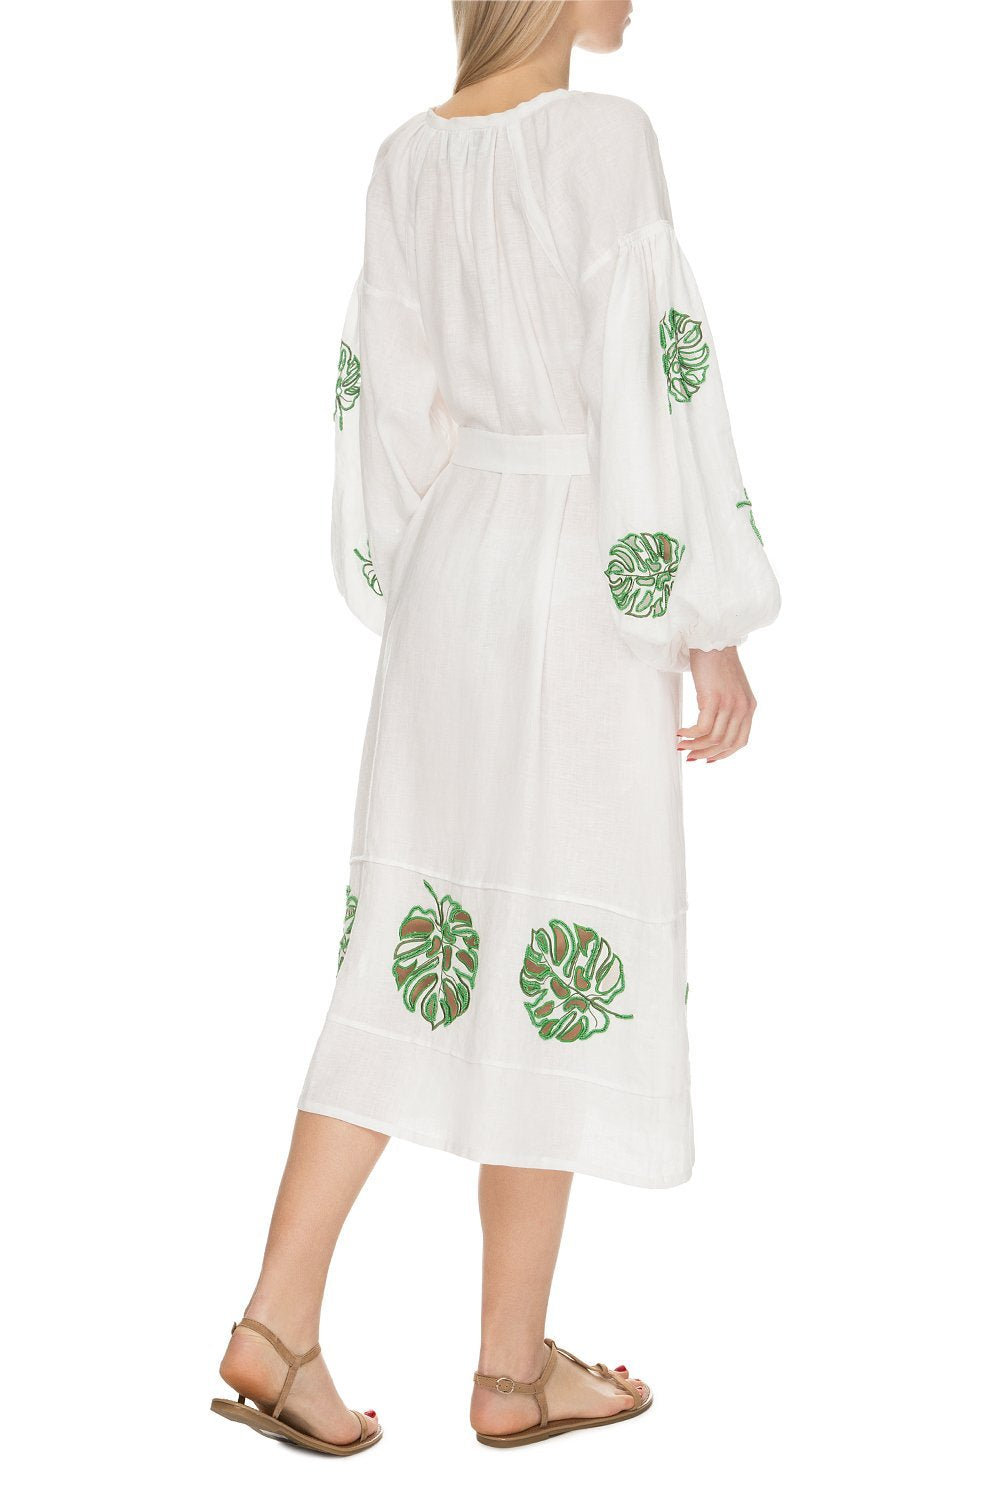 Bali White Dress with Sleeves and Beads